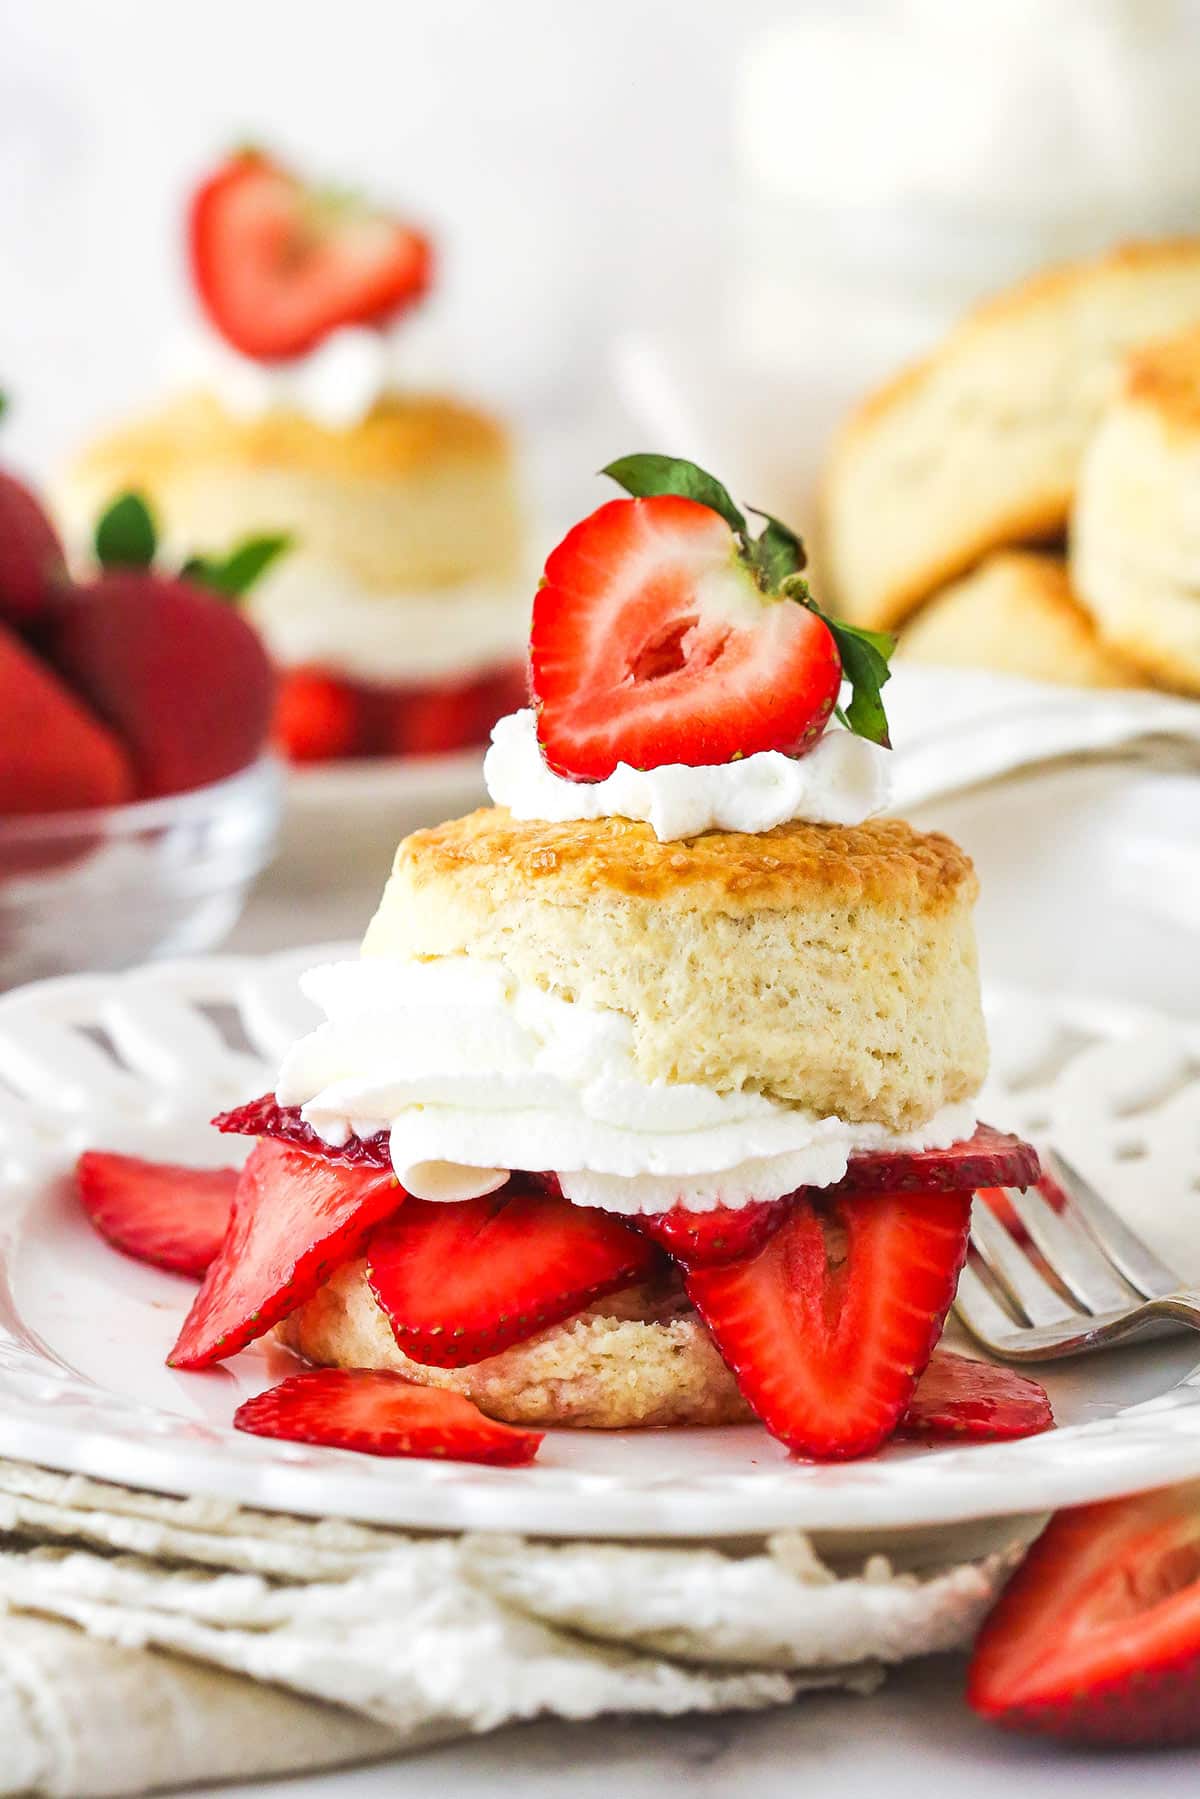 Strawberry shortcake on a plate with a fork.